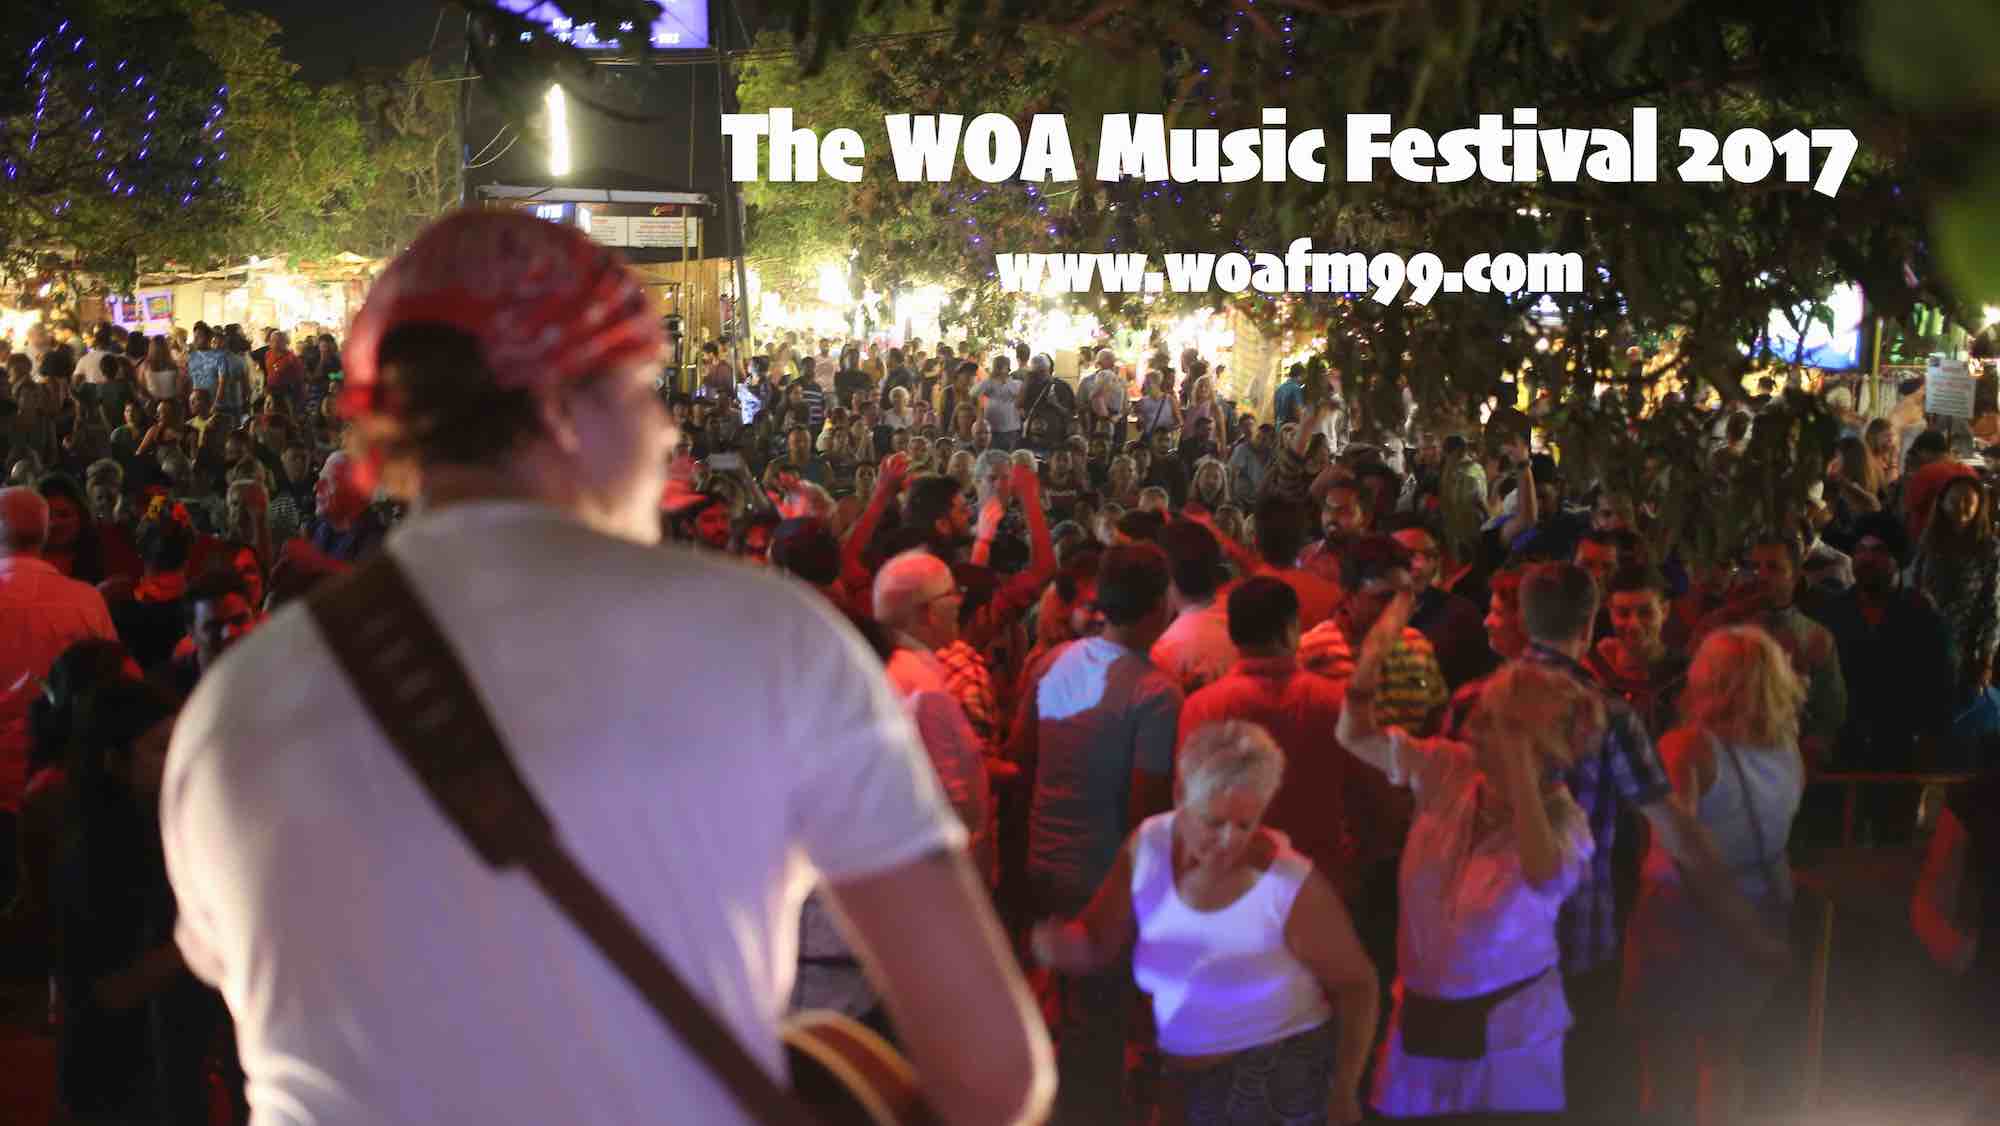 Post Festival Episode - WOAFM99 Radio Show with Oliver Sean (S9, Ep7)